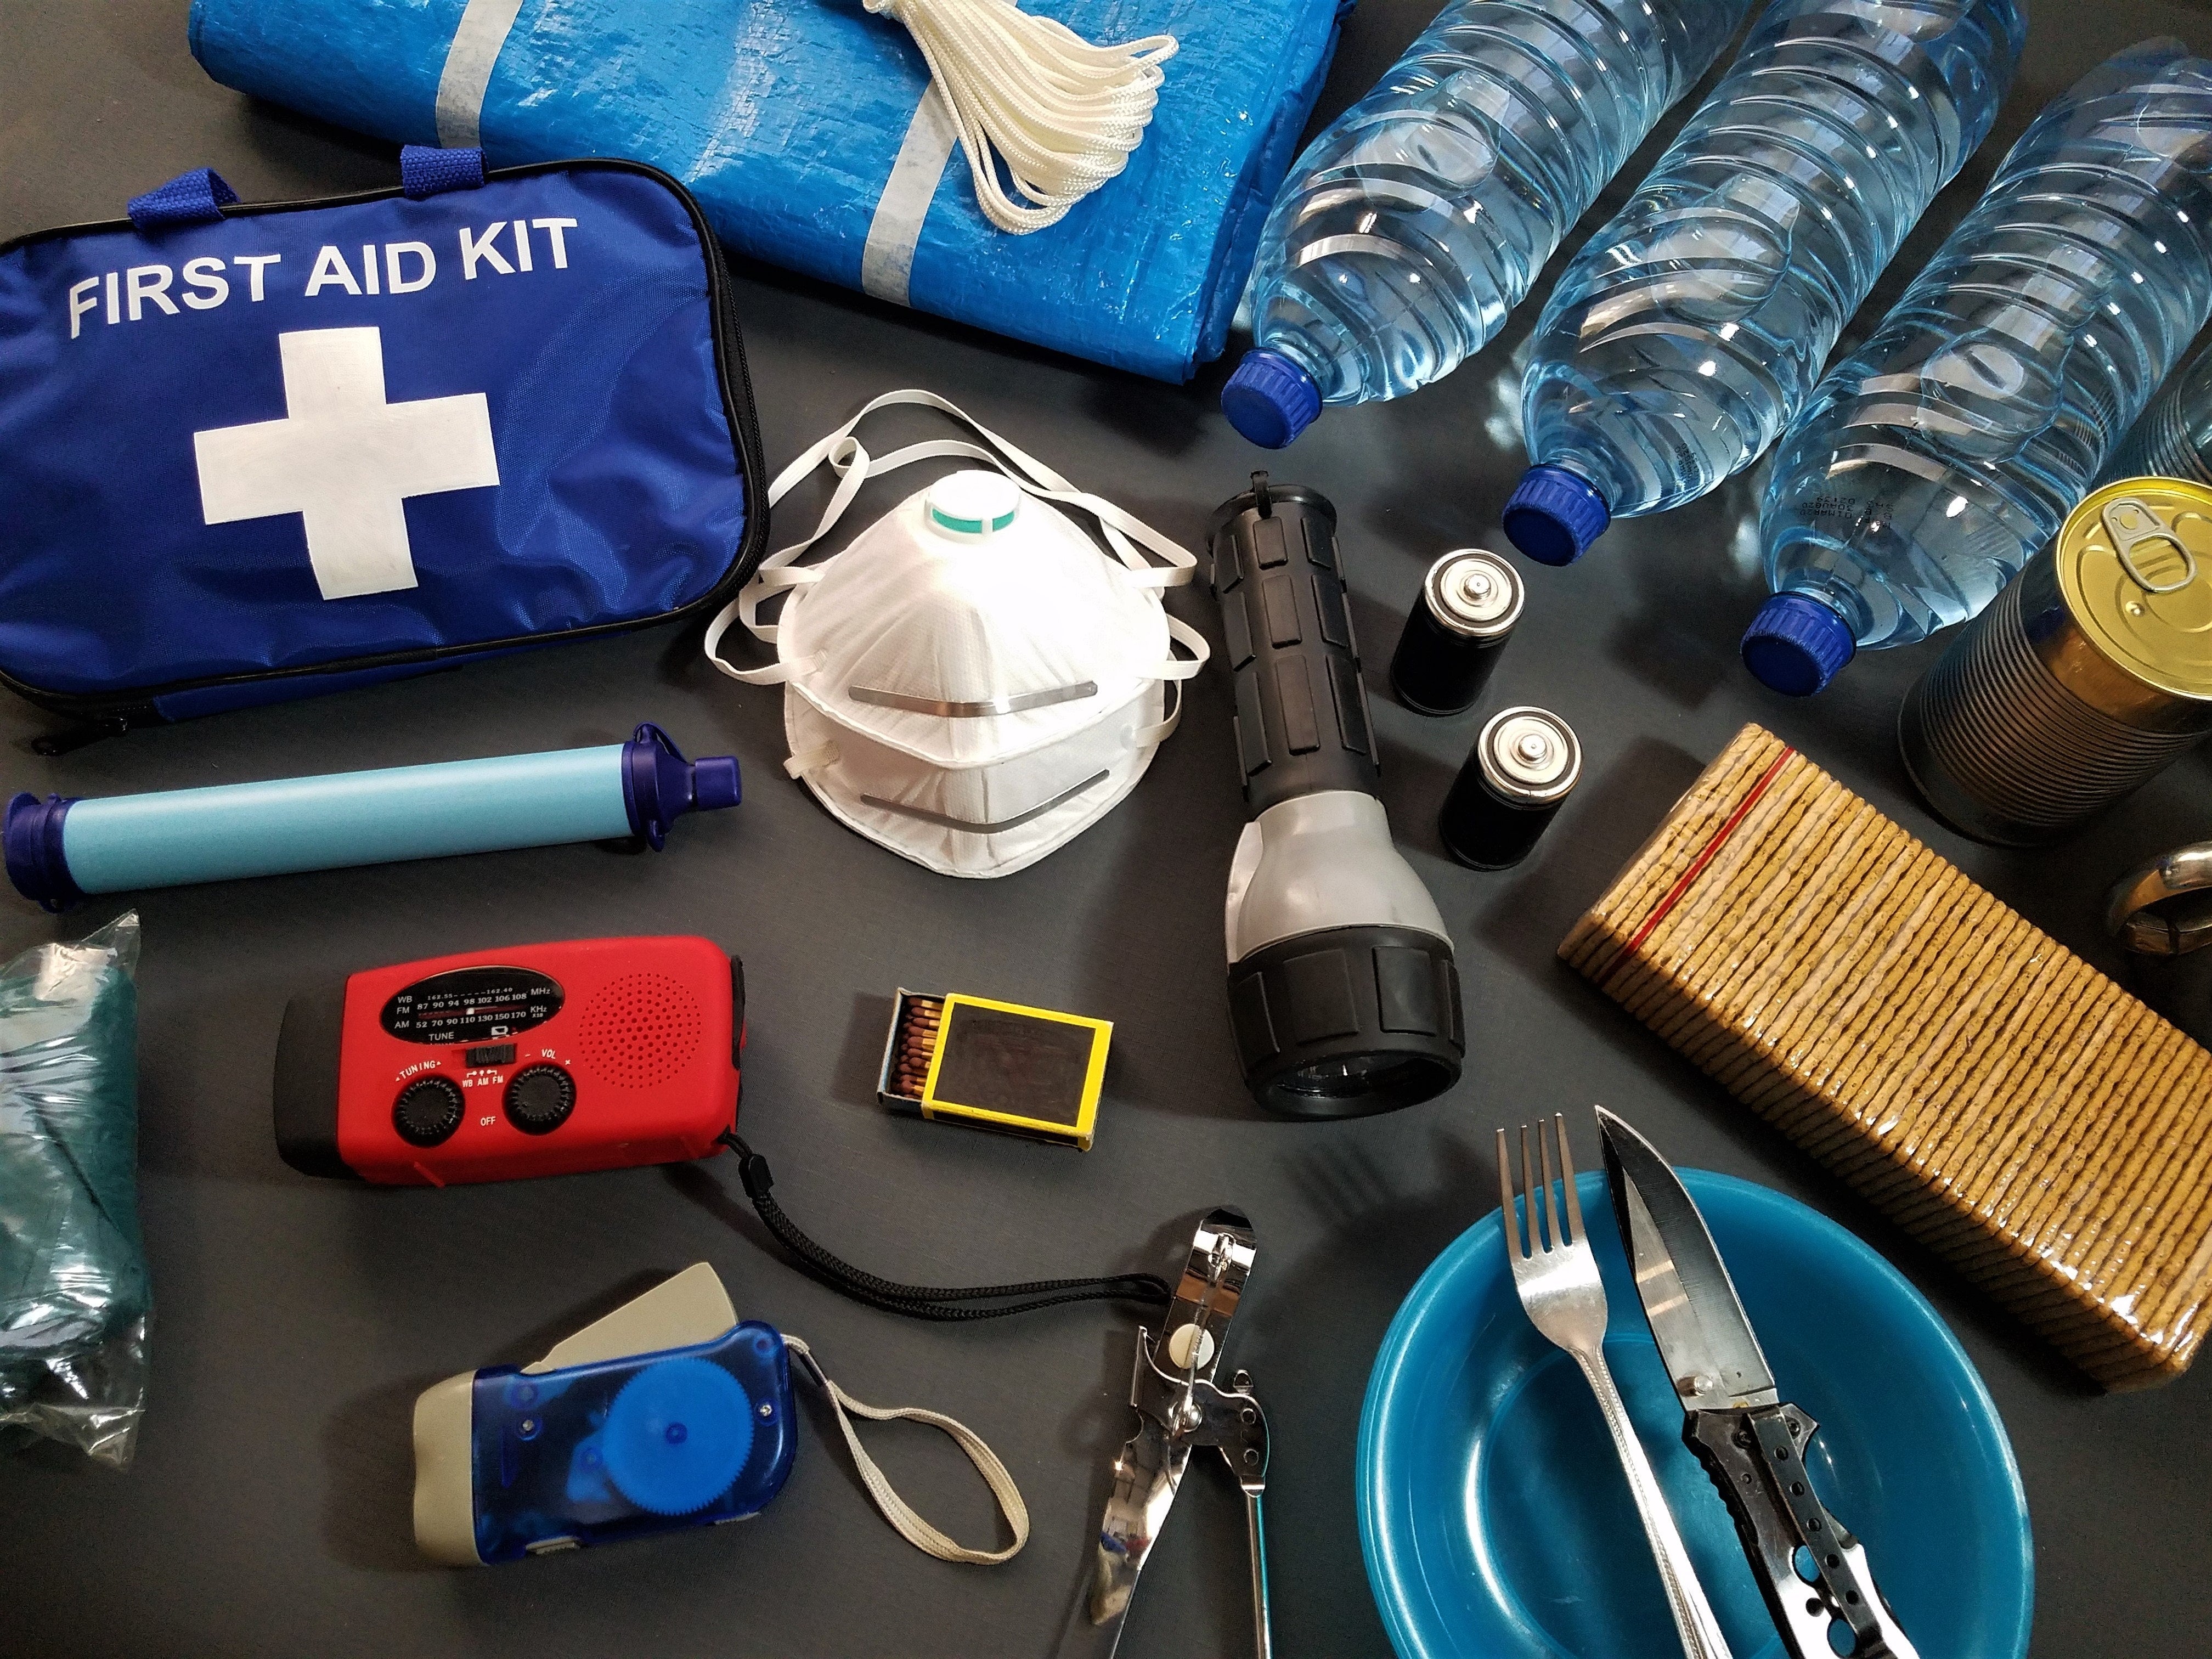 Creating an emergency kit for your home and car - Defiance Gear Co.